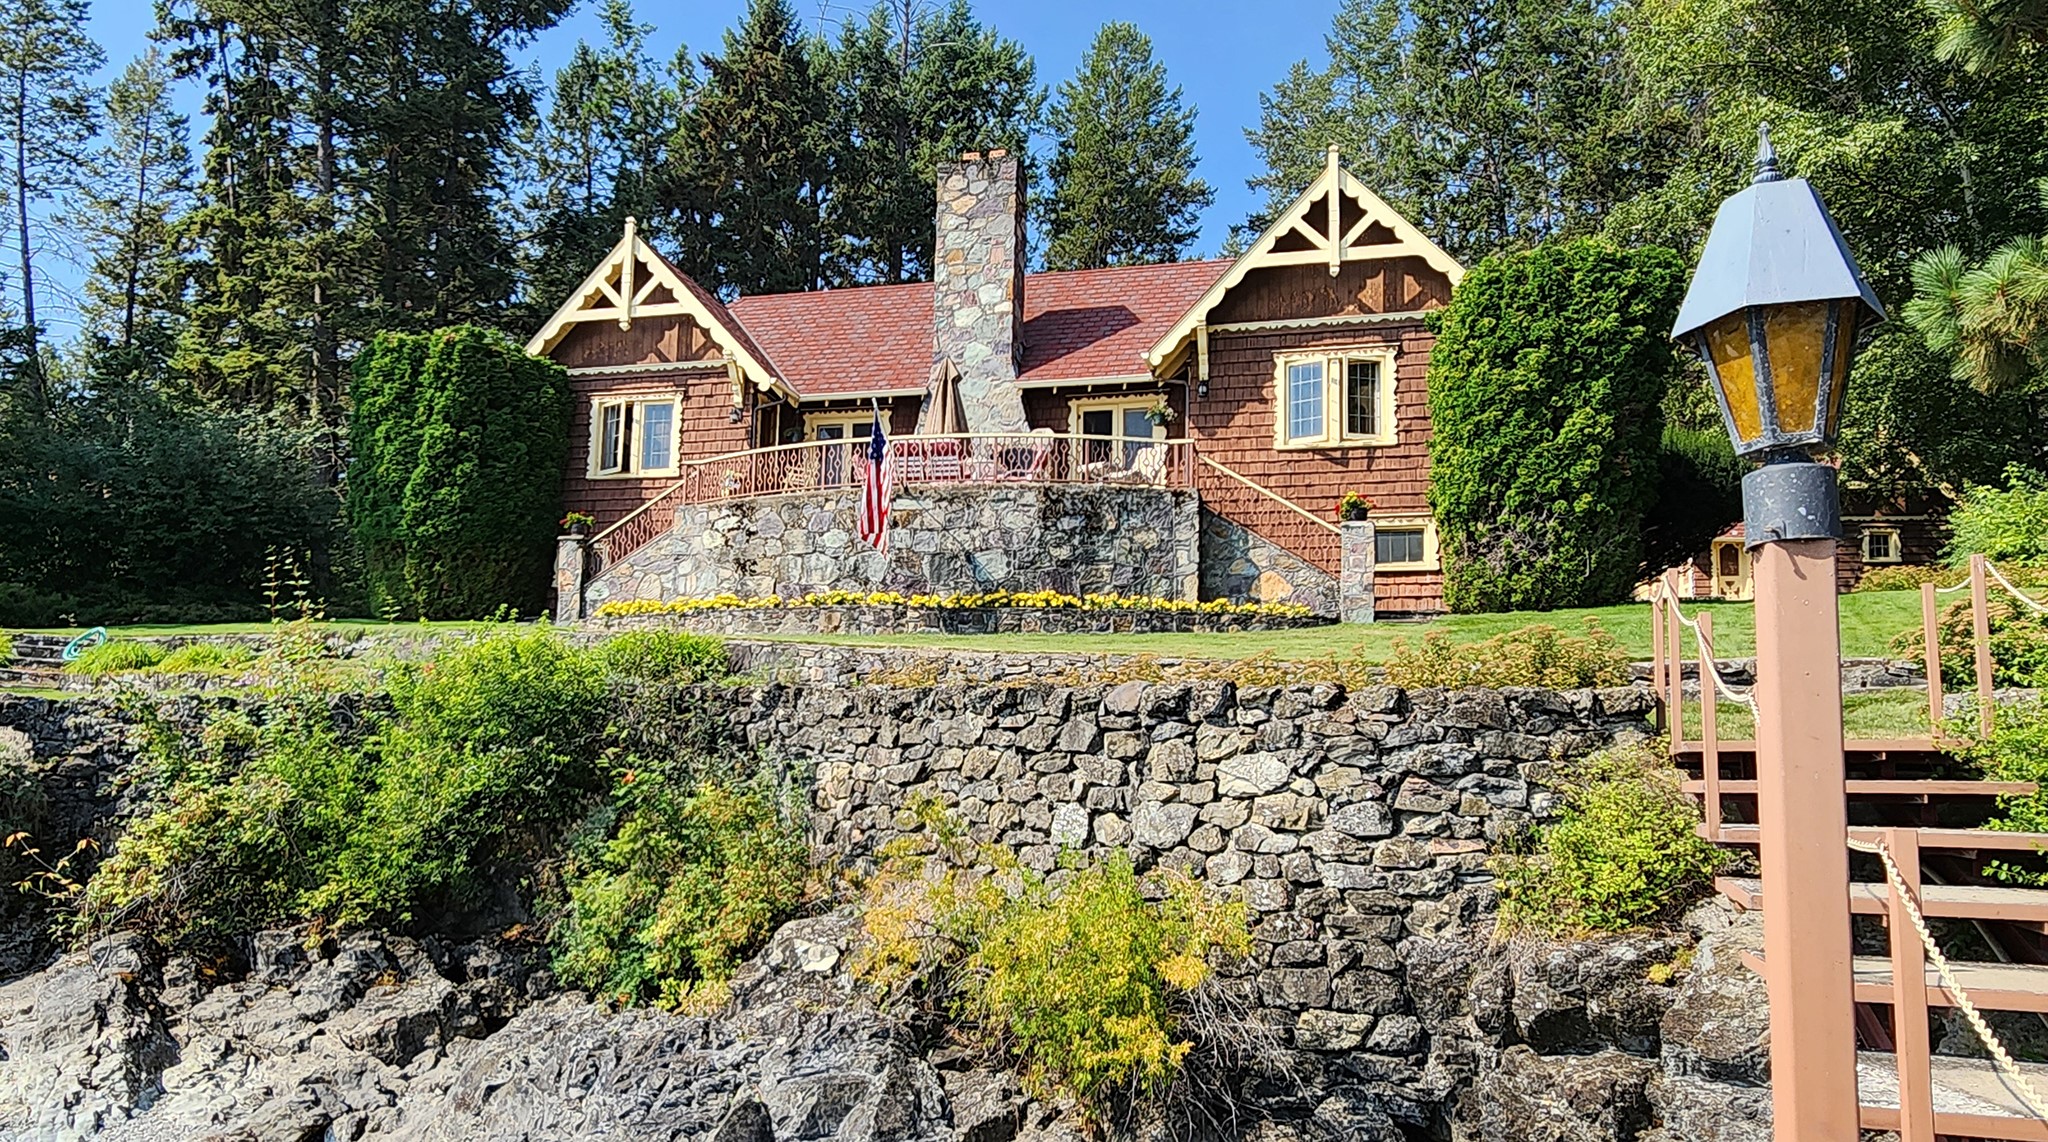 Generations, since the 1960s, have enjoyed this recognizable "Gingerbread" house along the westshore of Flathead Lake. This historic home sits on 3.7 acres and 378 feet of frontage spread over multiple lots (see survey). Very private, the circular driveway is bordered by long standing rockwork and landscaped grassy lawn. Enter into a large Living Room with rock fireplace. As you discover the home, you'll notice all the carved woodwork detailing, wood floors, and historic lighting & textiles. The S wing has 2 Bedrooms and full Bath. The north wing has the Kitchen and Dining Room, another Bedroom with attached 3/4 Bath. Downstairs is a Bedroom, Storage and Utility Room. Facing the lake is a full-length stone patio with outdoor fireplace to enjoy the sunrise and Alpenglow in the evening. Amenities include dock, dble garage, laundry shed. To west is the interior knoll of Caroline Point for guest house and exploring. Call Scott Hollinger at 406-253-7268 or your real estate professional.